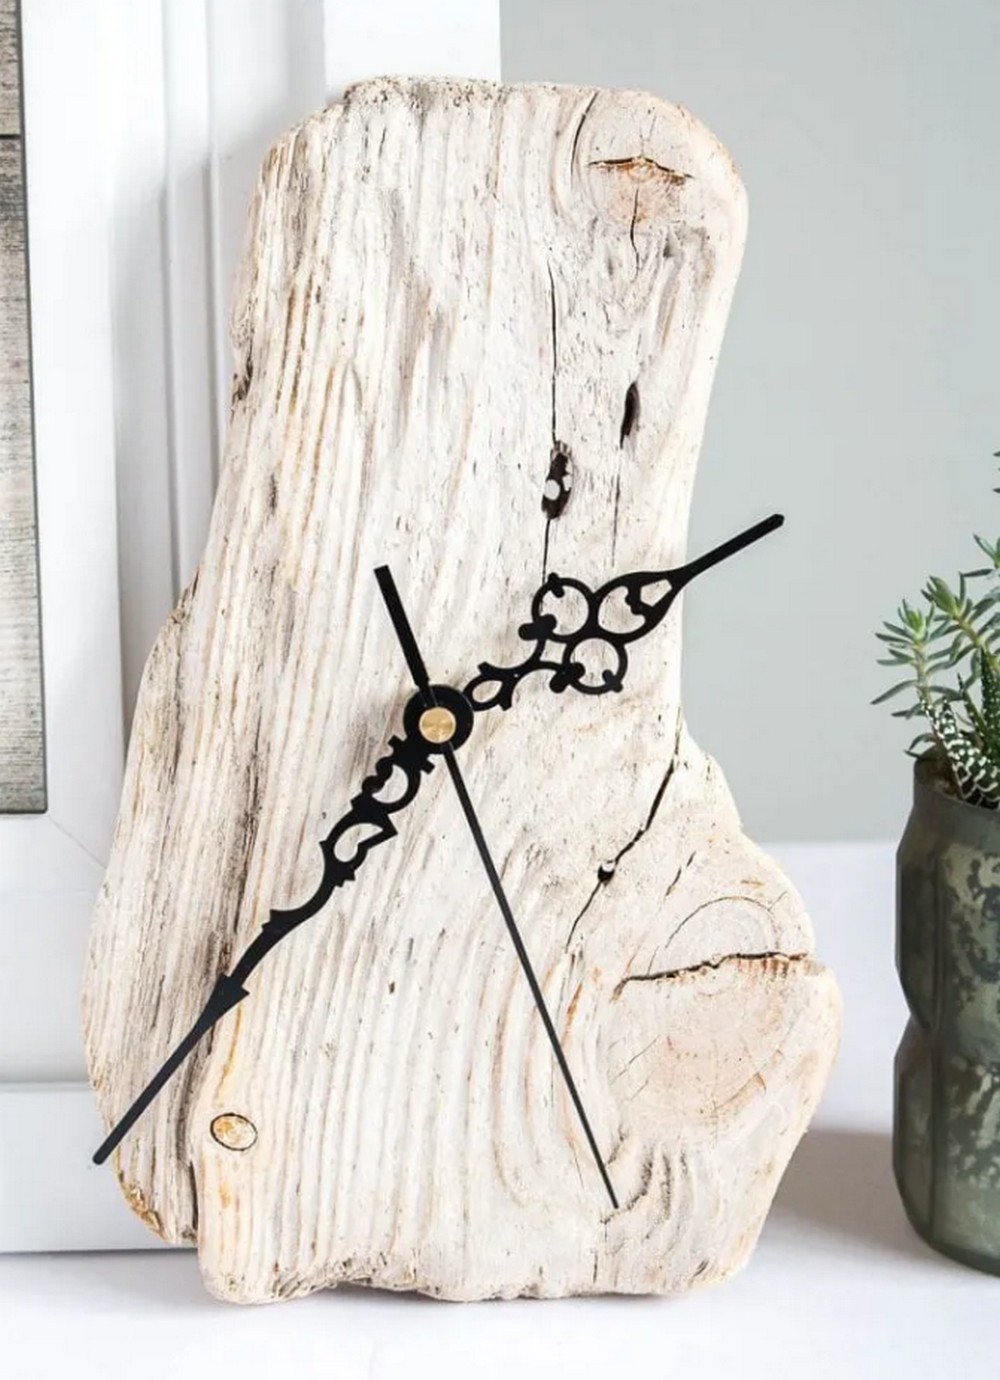 Make A Clock With Driftwood